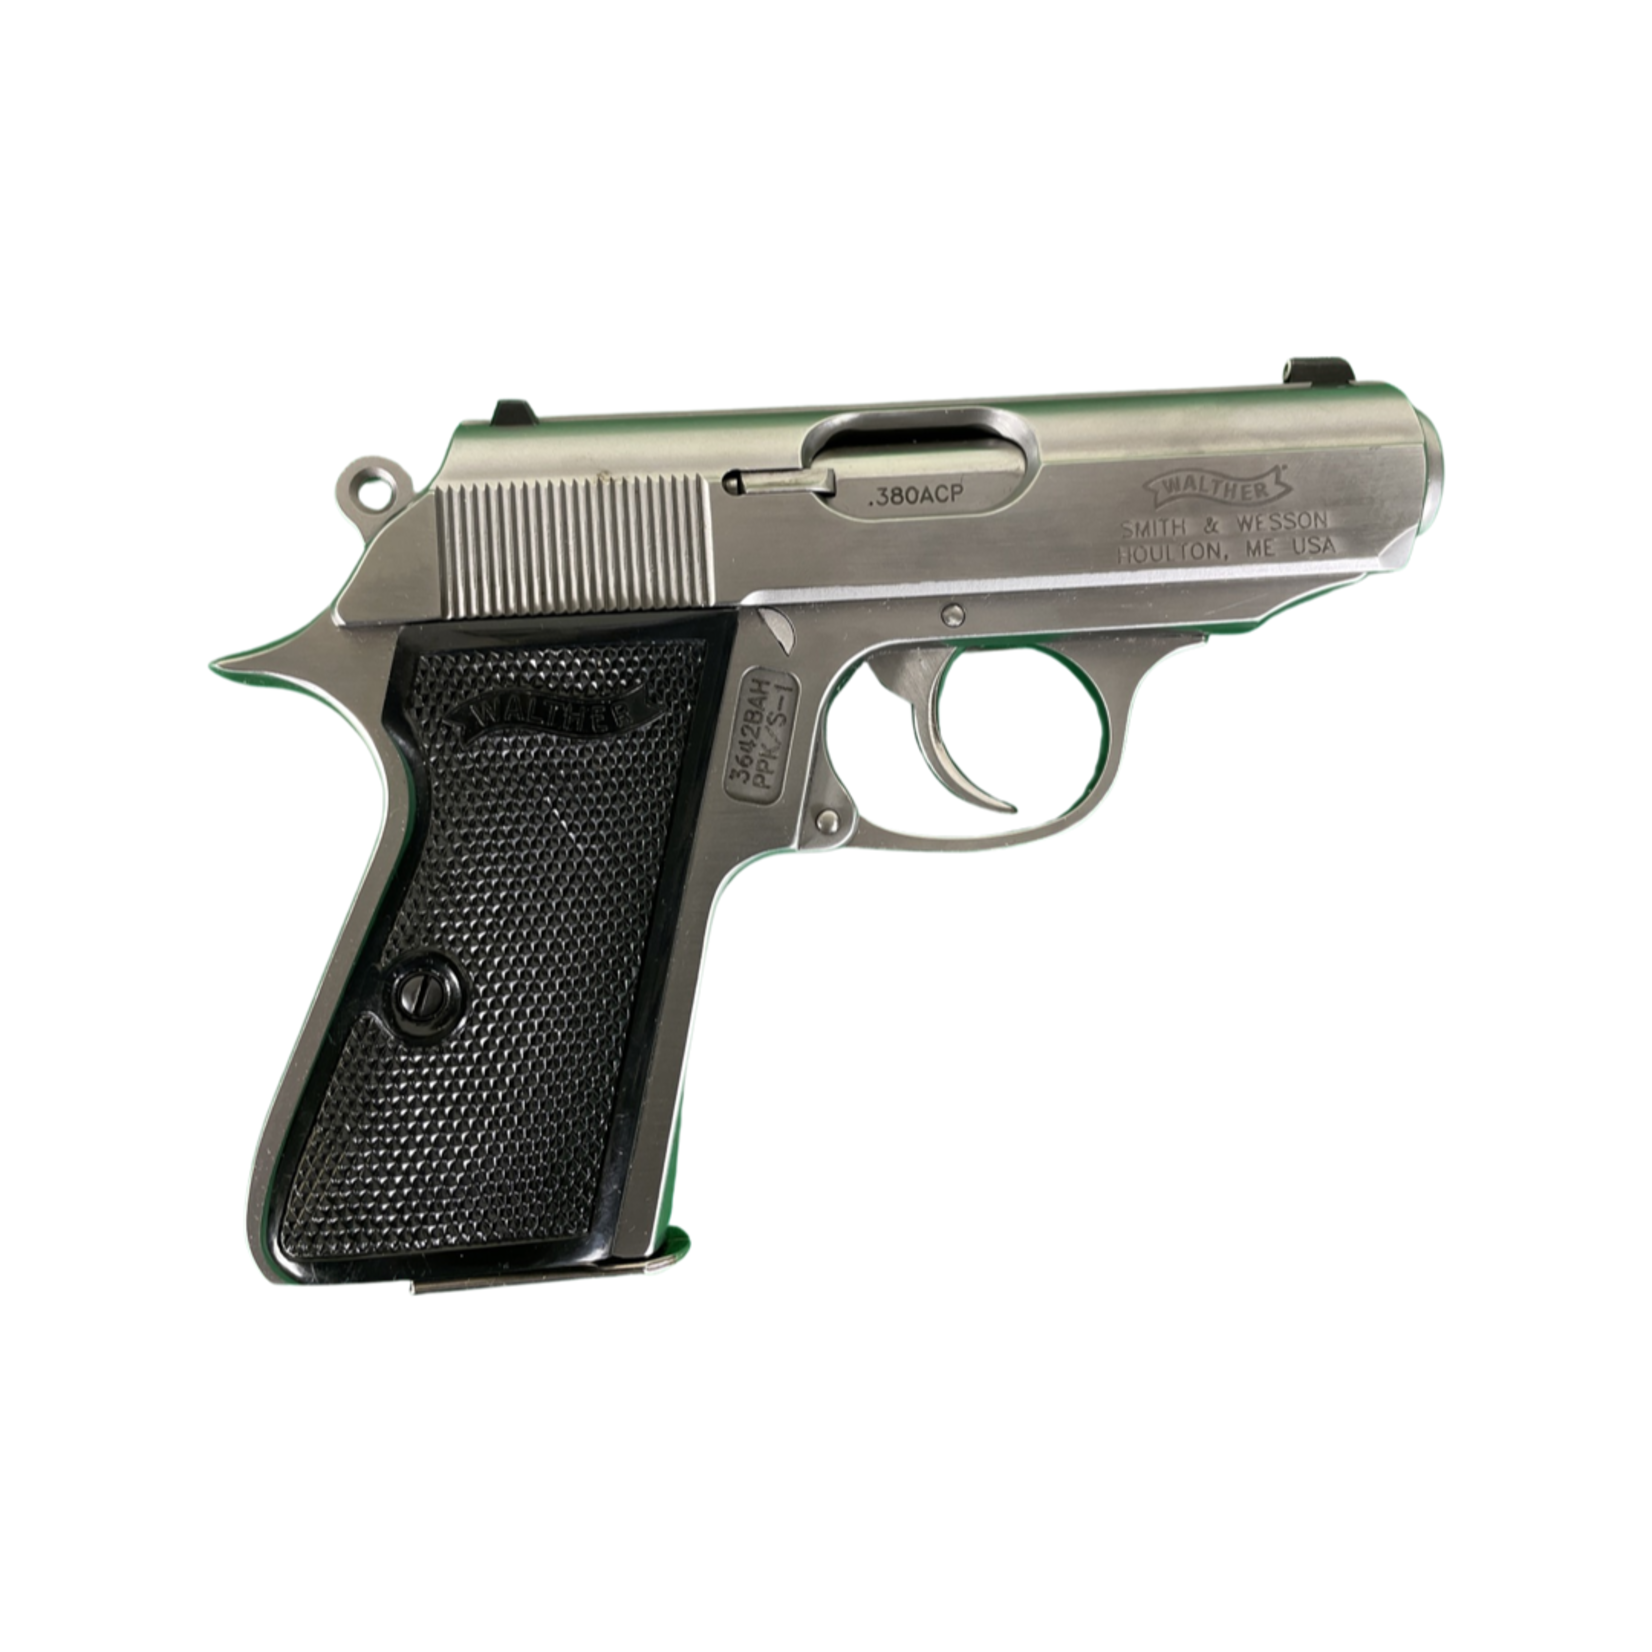 USED - Walther PPK/S-1